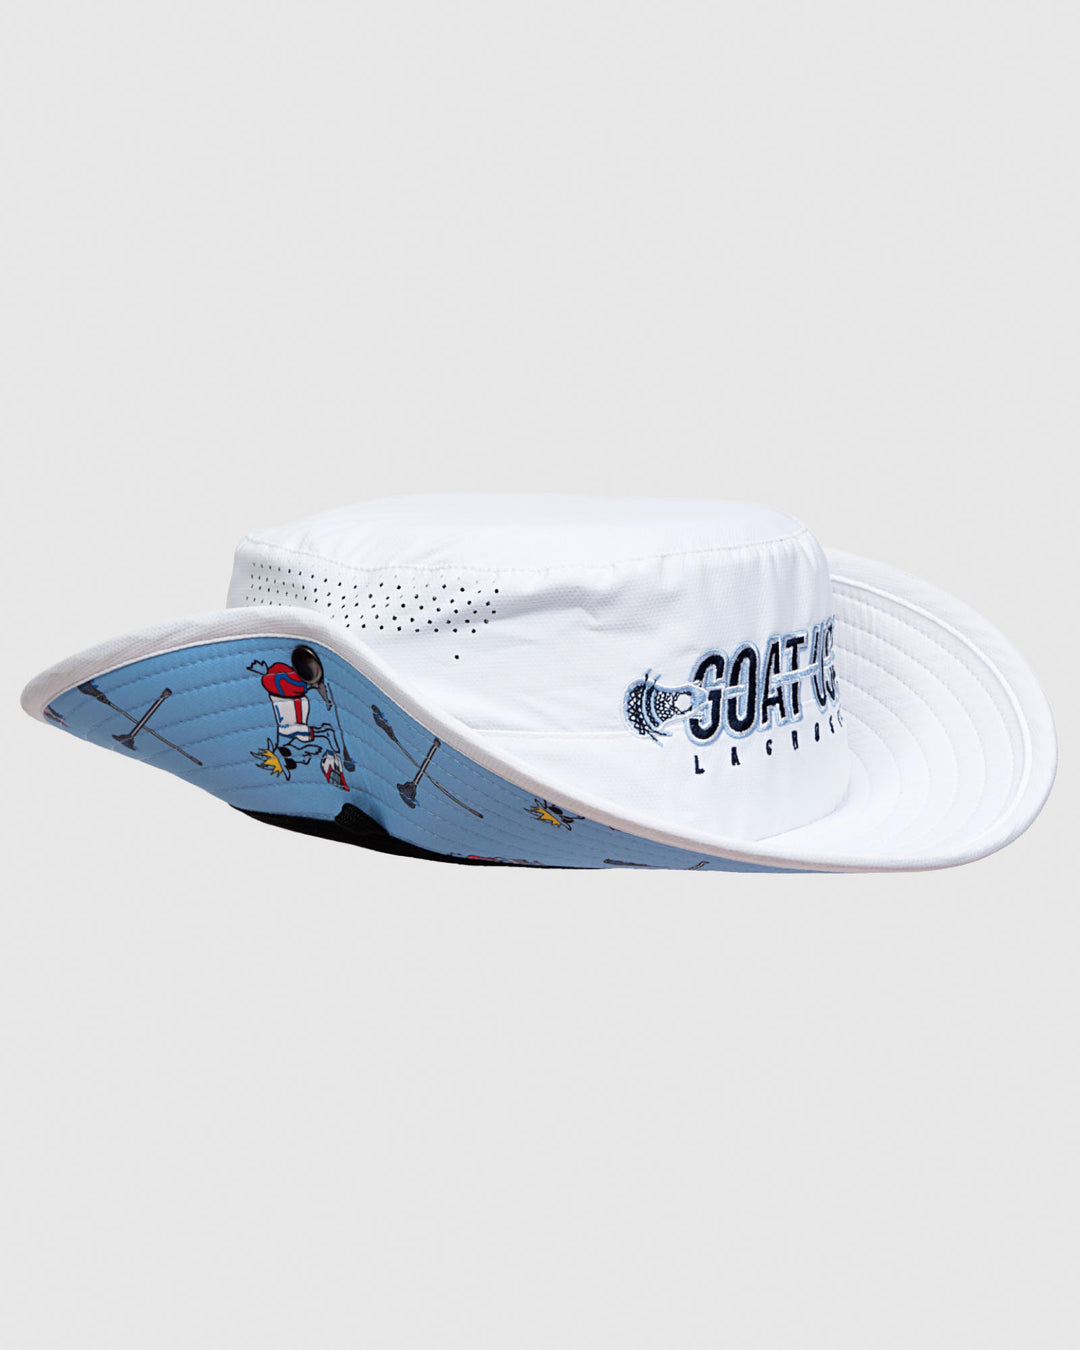 White bucket hat with side flaps clipped up